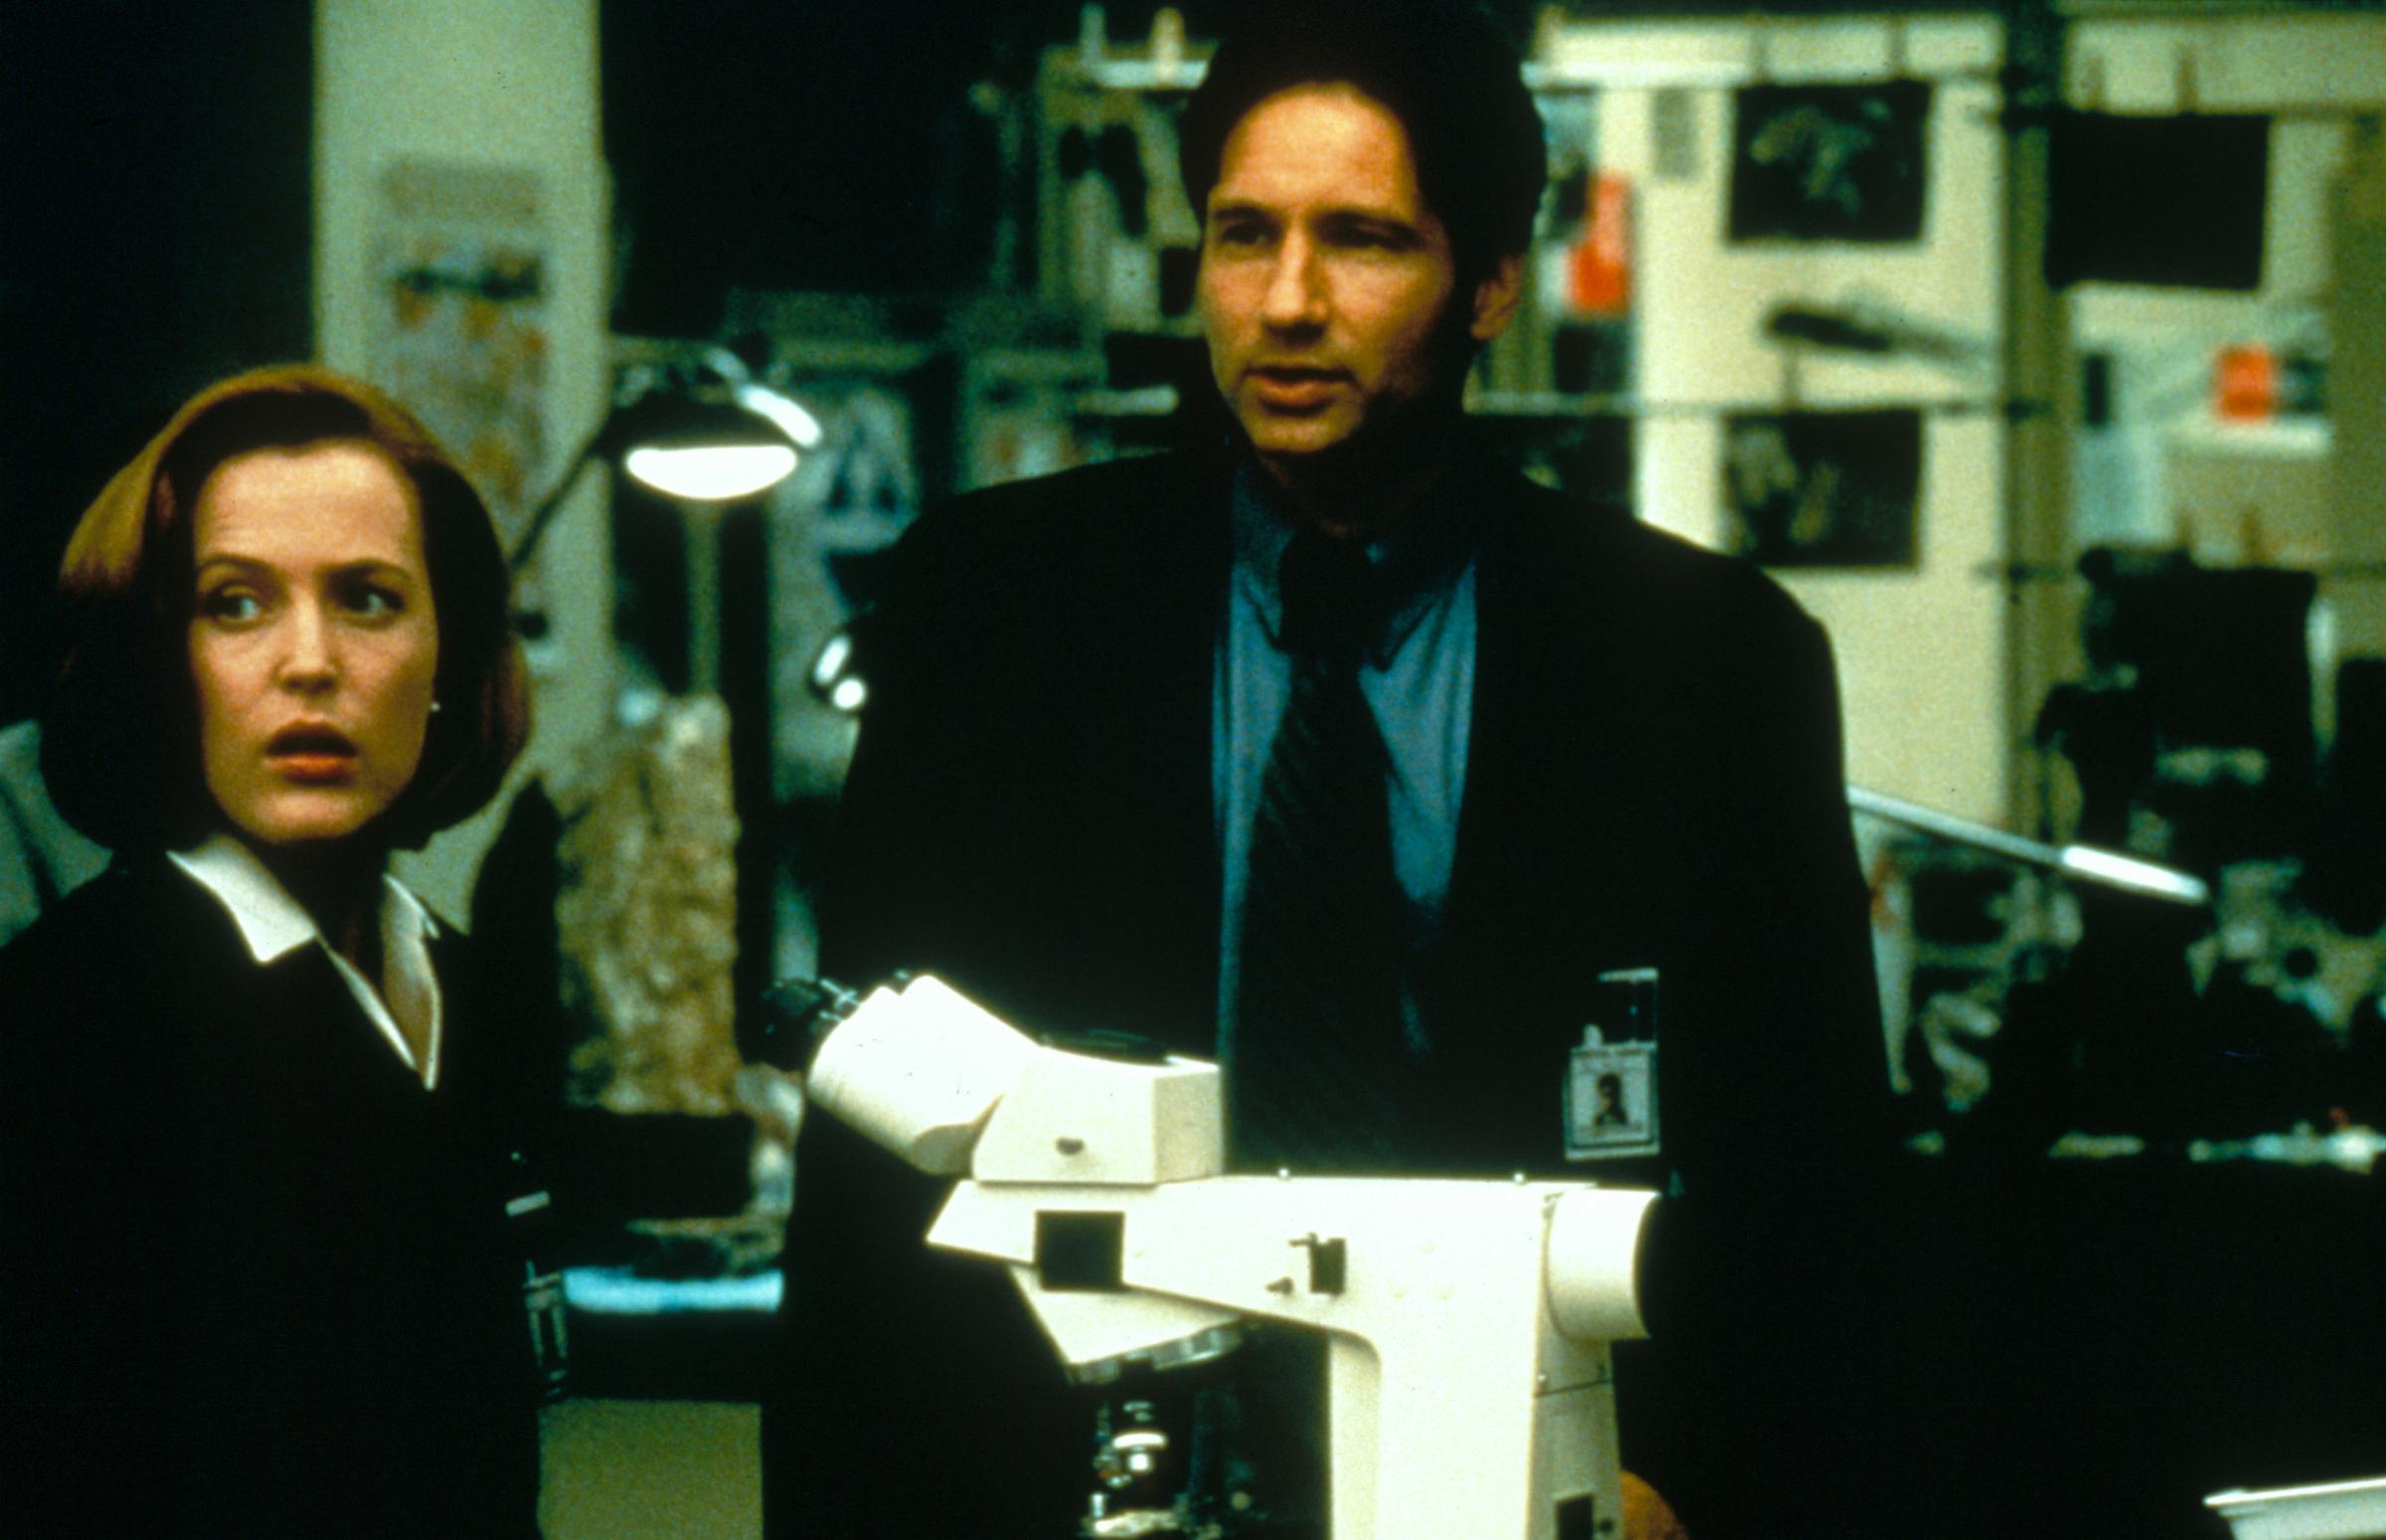 Gillian Anderson and David Duchovny are seen in The X-Files film in 1998.